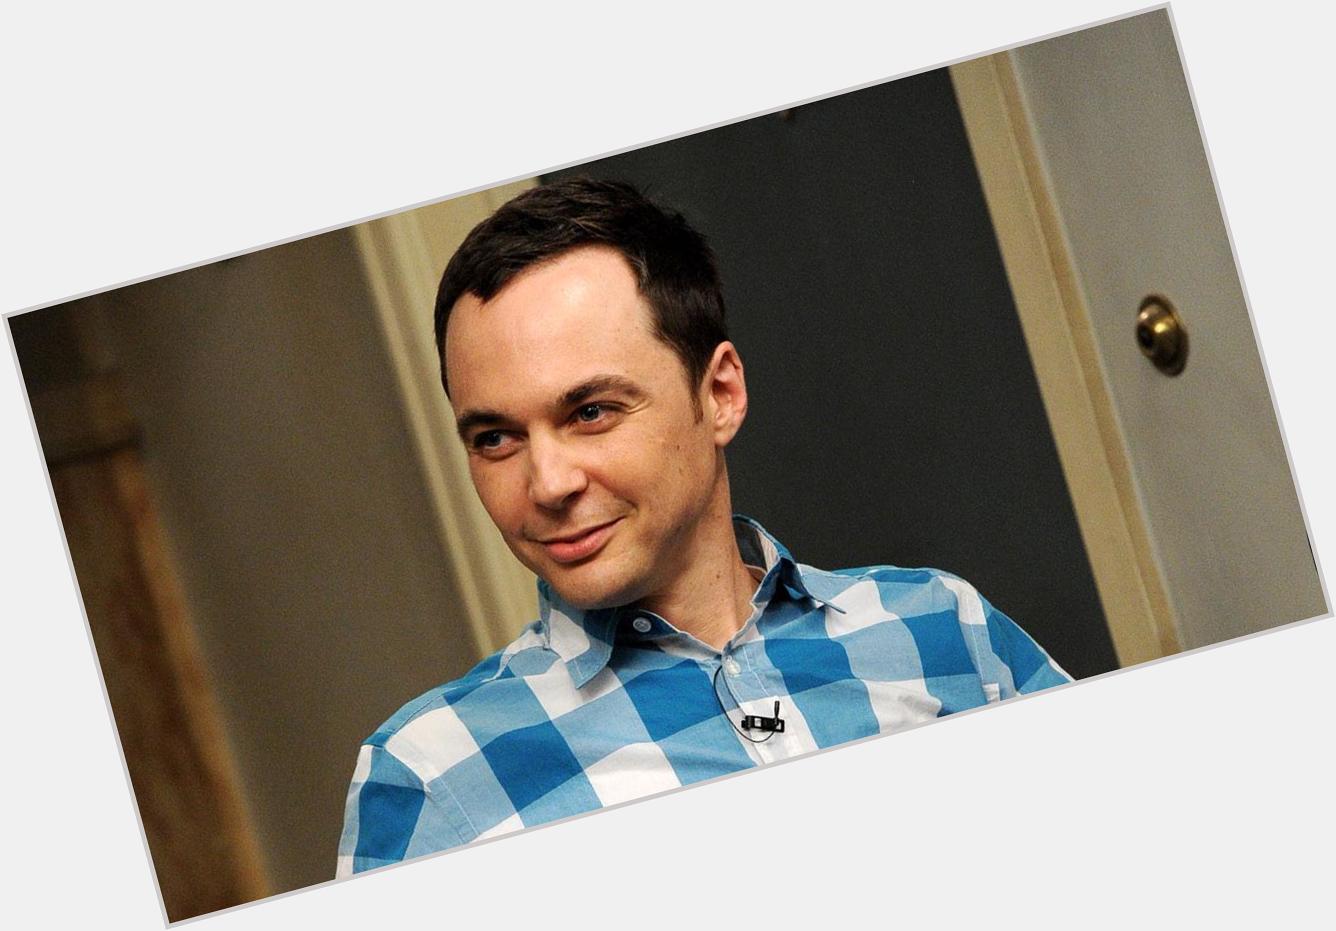   Join us in wishing a very happy birthday to Jim Parsons. HAPPY BIRTHDAY!